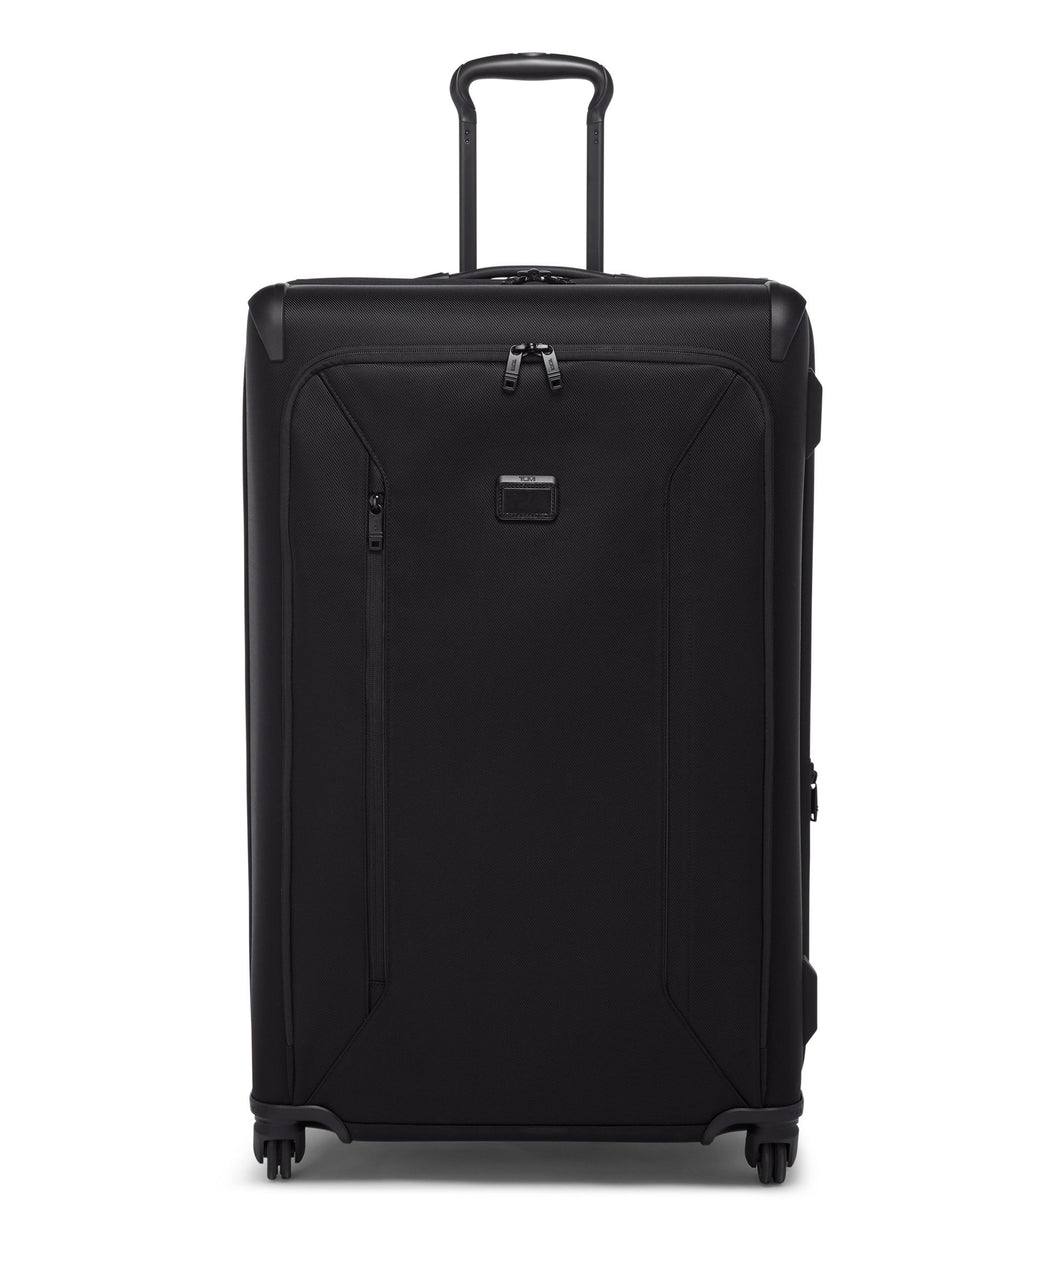 AEROTOUR Extended Trip Expandable 4 Wheeled Packing Case